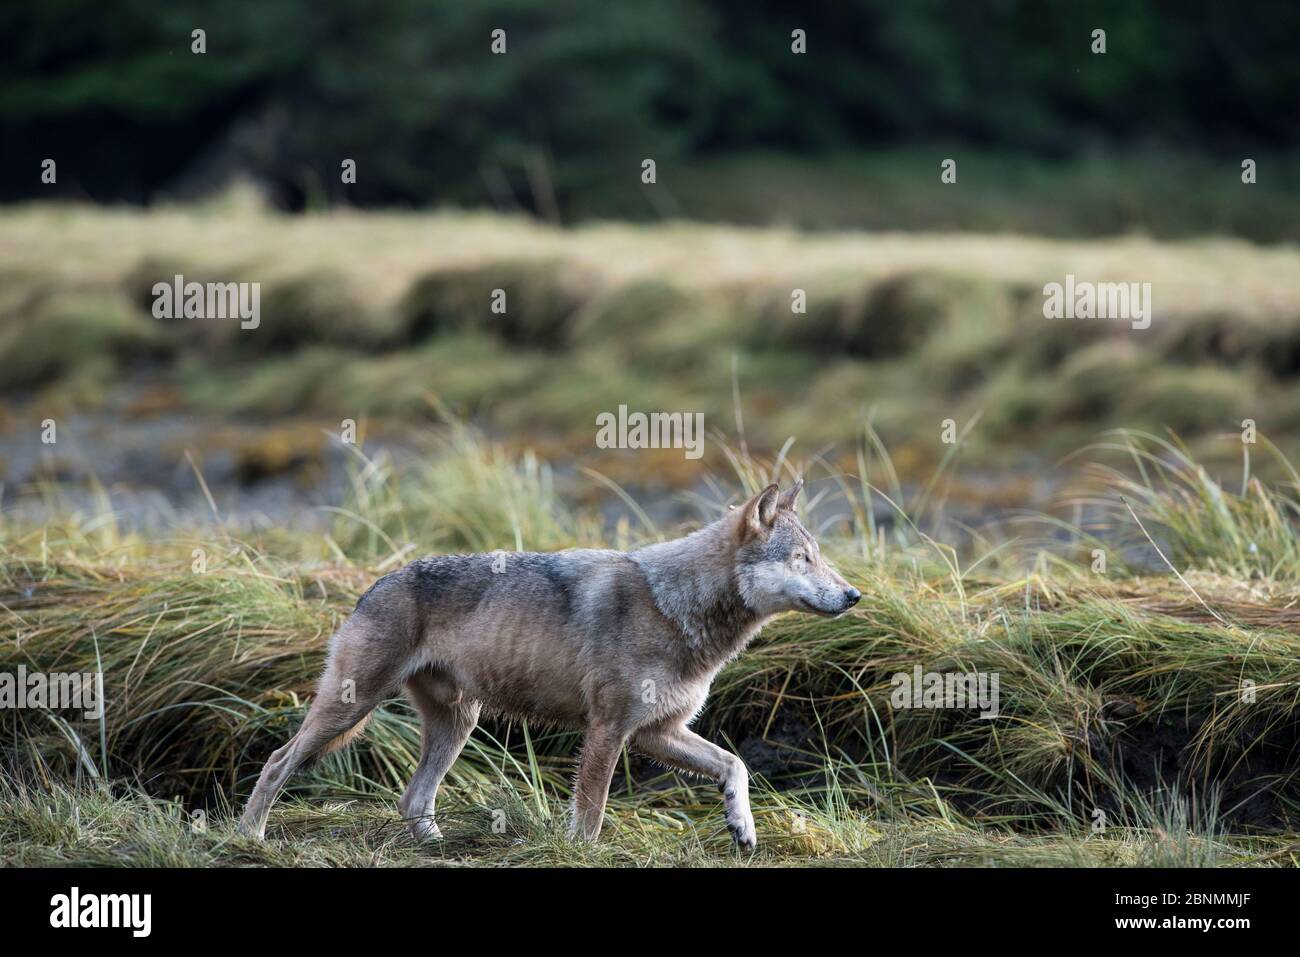 Coastal grey wolf (Canis lupus) genetically distinct from other Grey wolves, Sacred Sites of the Gitga'at Nation, Great Bear Rainforest, British Colum Stock Photo